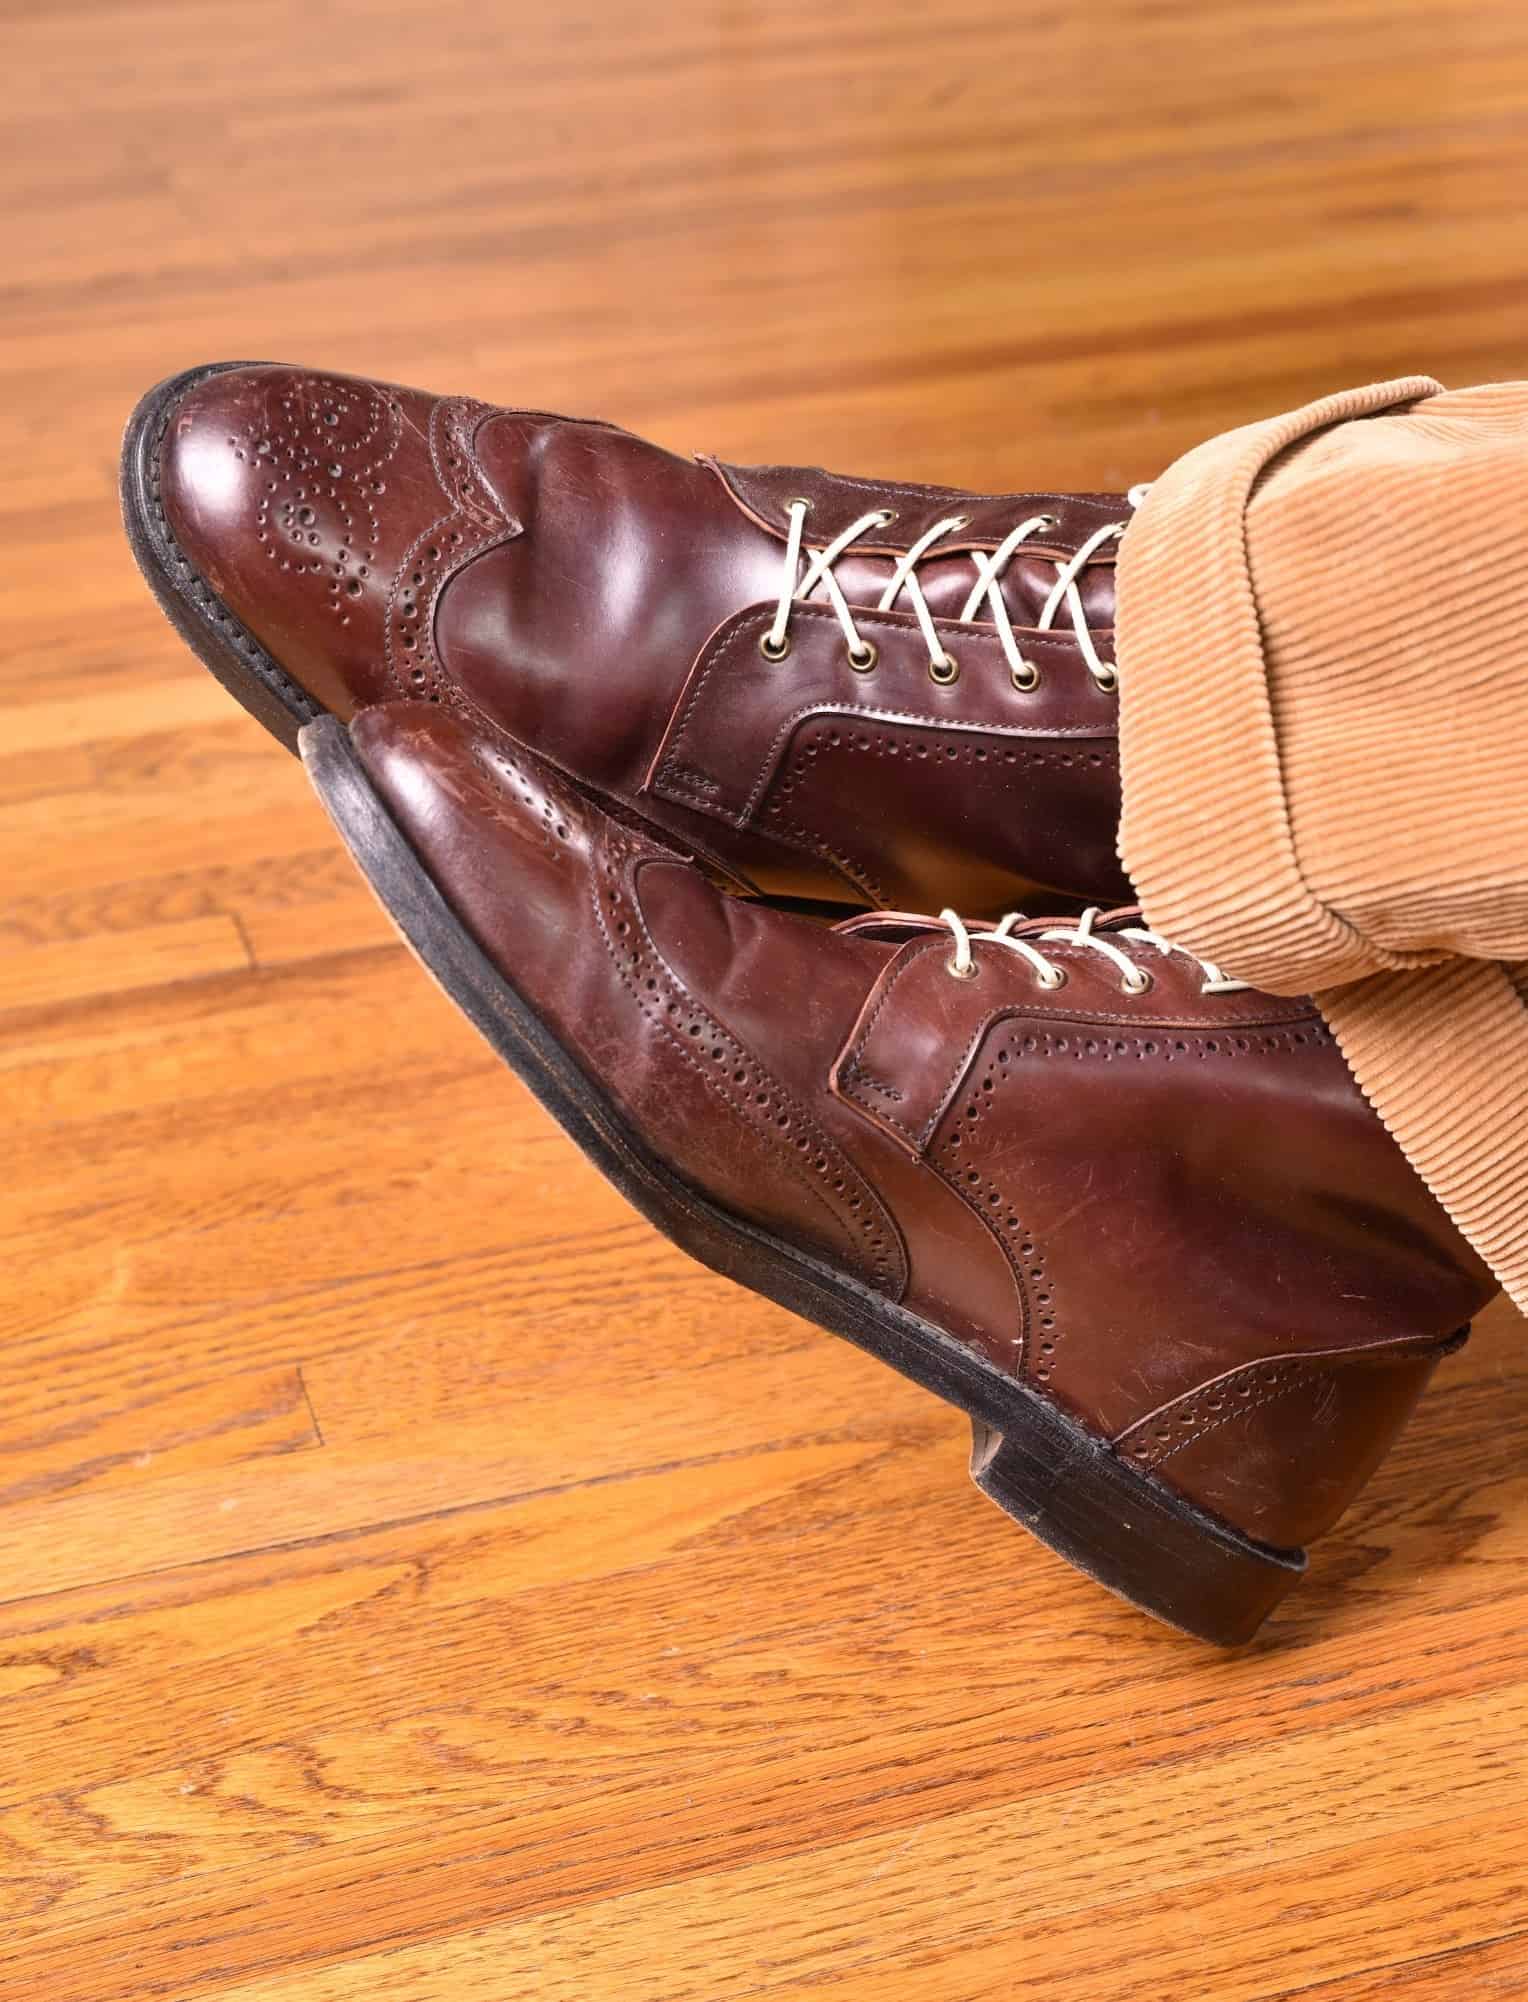 Cordovan boots with pink laces and tan corduroy trousers